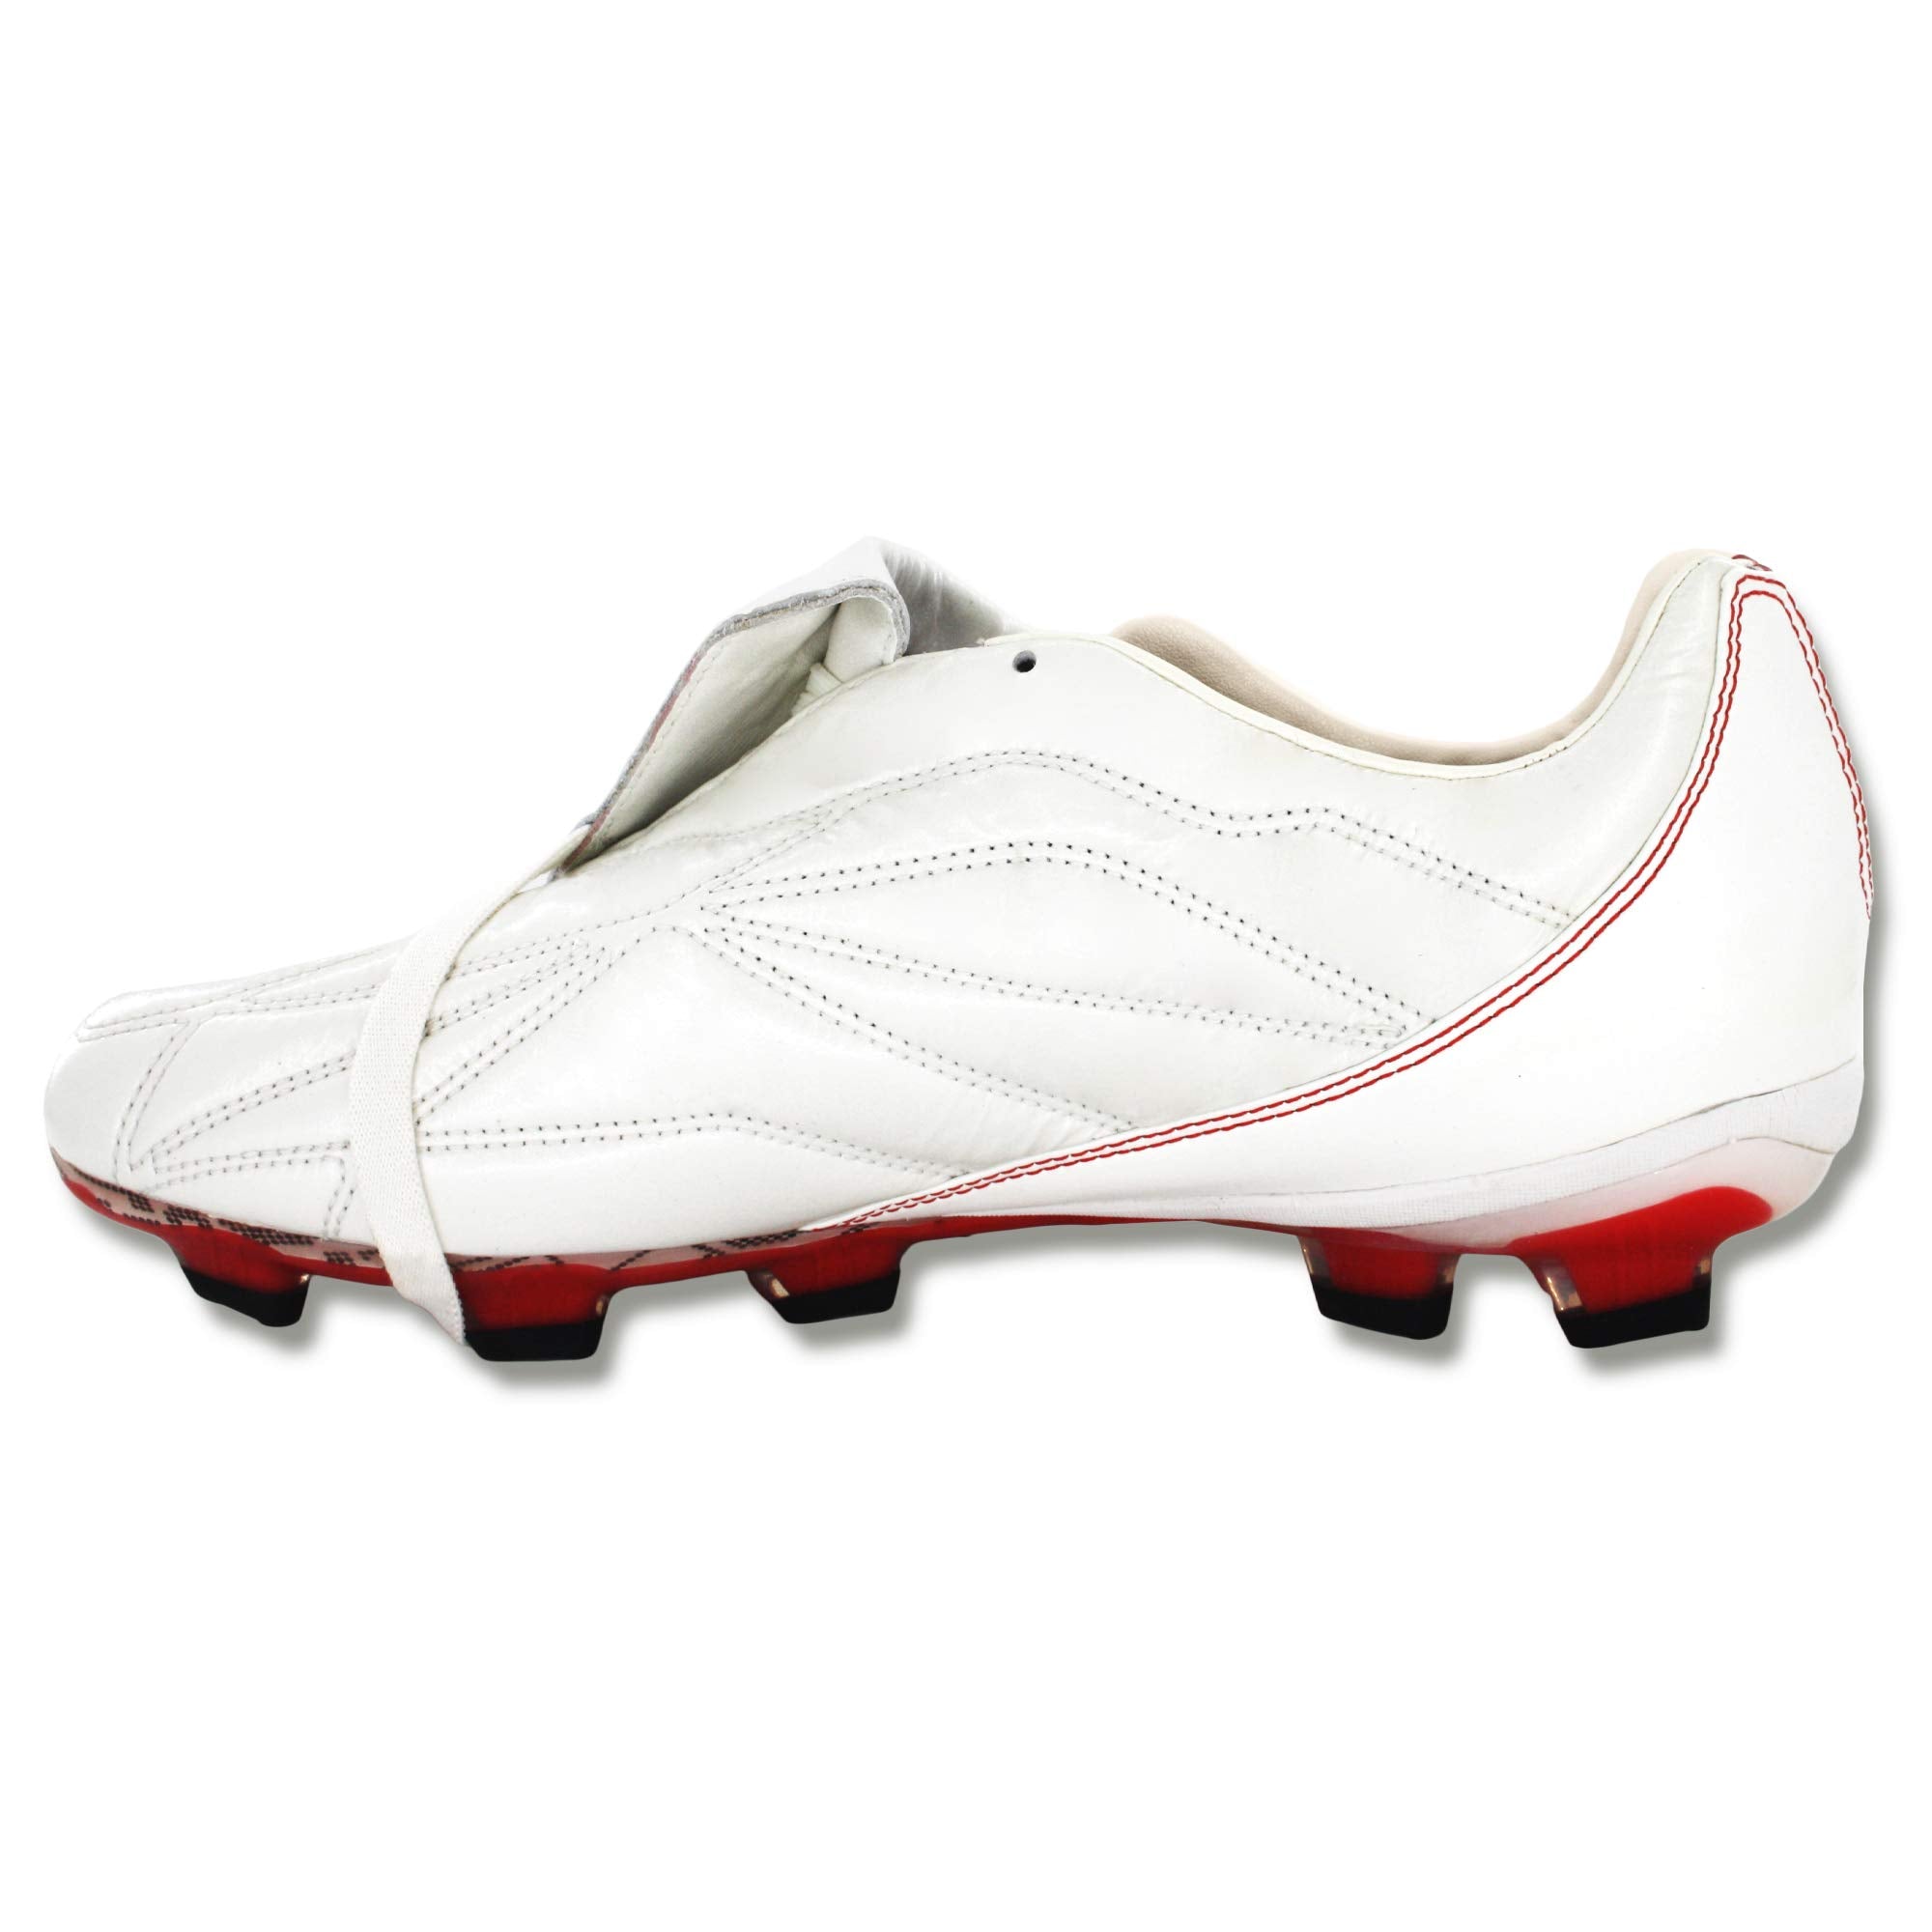 Pele Sports 1962 FG MS Junior Kid's Football Boots - White / Red